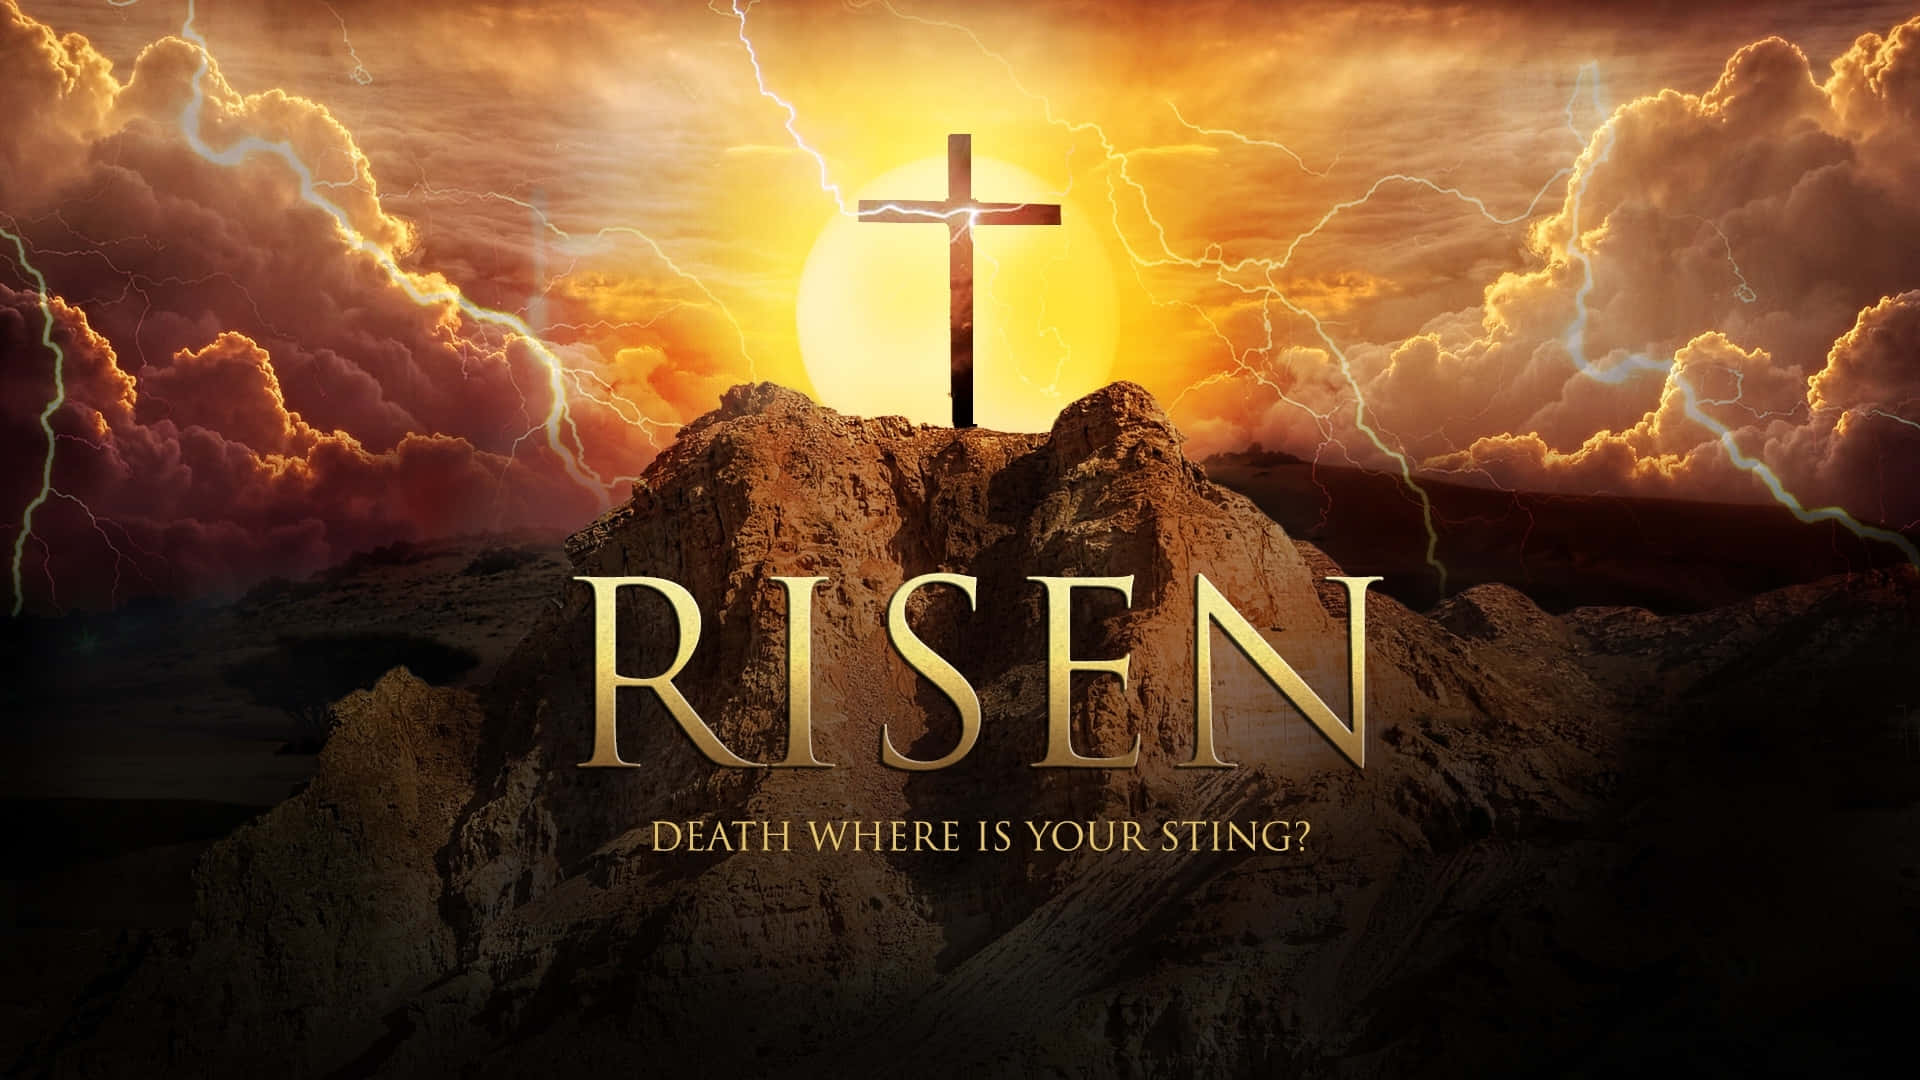 Free Religious Easter Wallpaper Downloads, Religious Easter Wallpaper for FREE